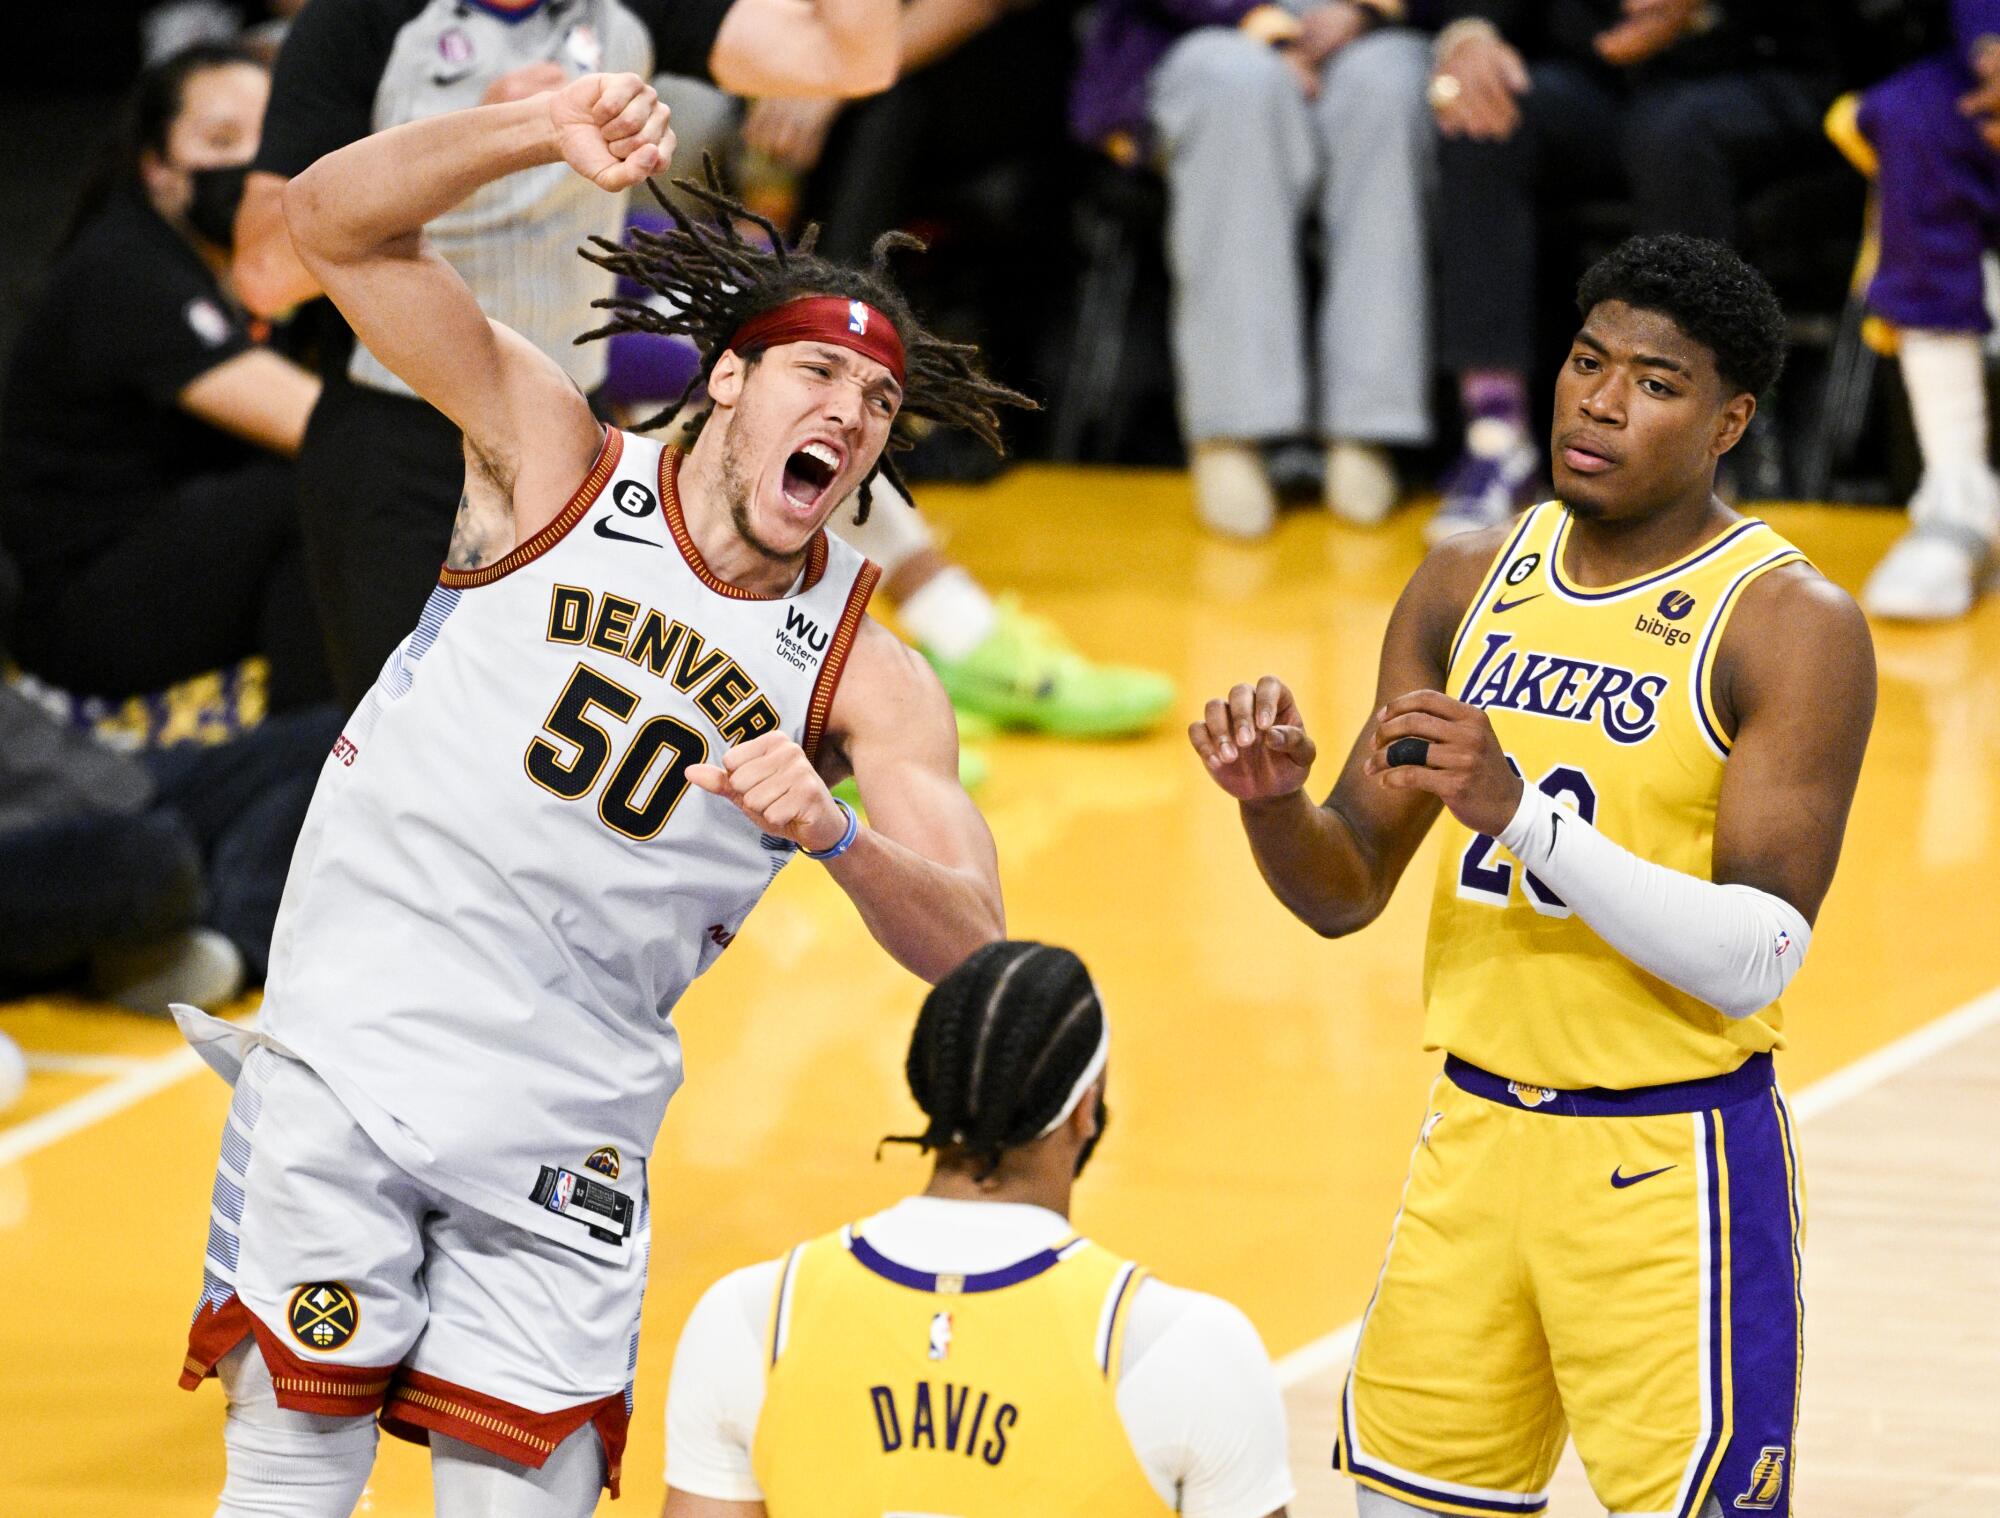 Nuggets forward Aaron Gordon reacts after being fouled by Lakers guard Austin Reaves on a dunk.